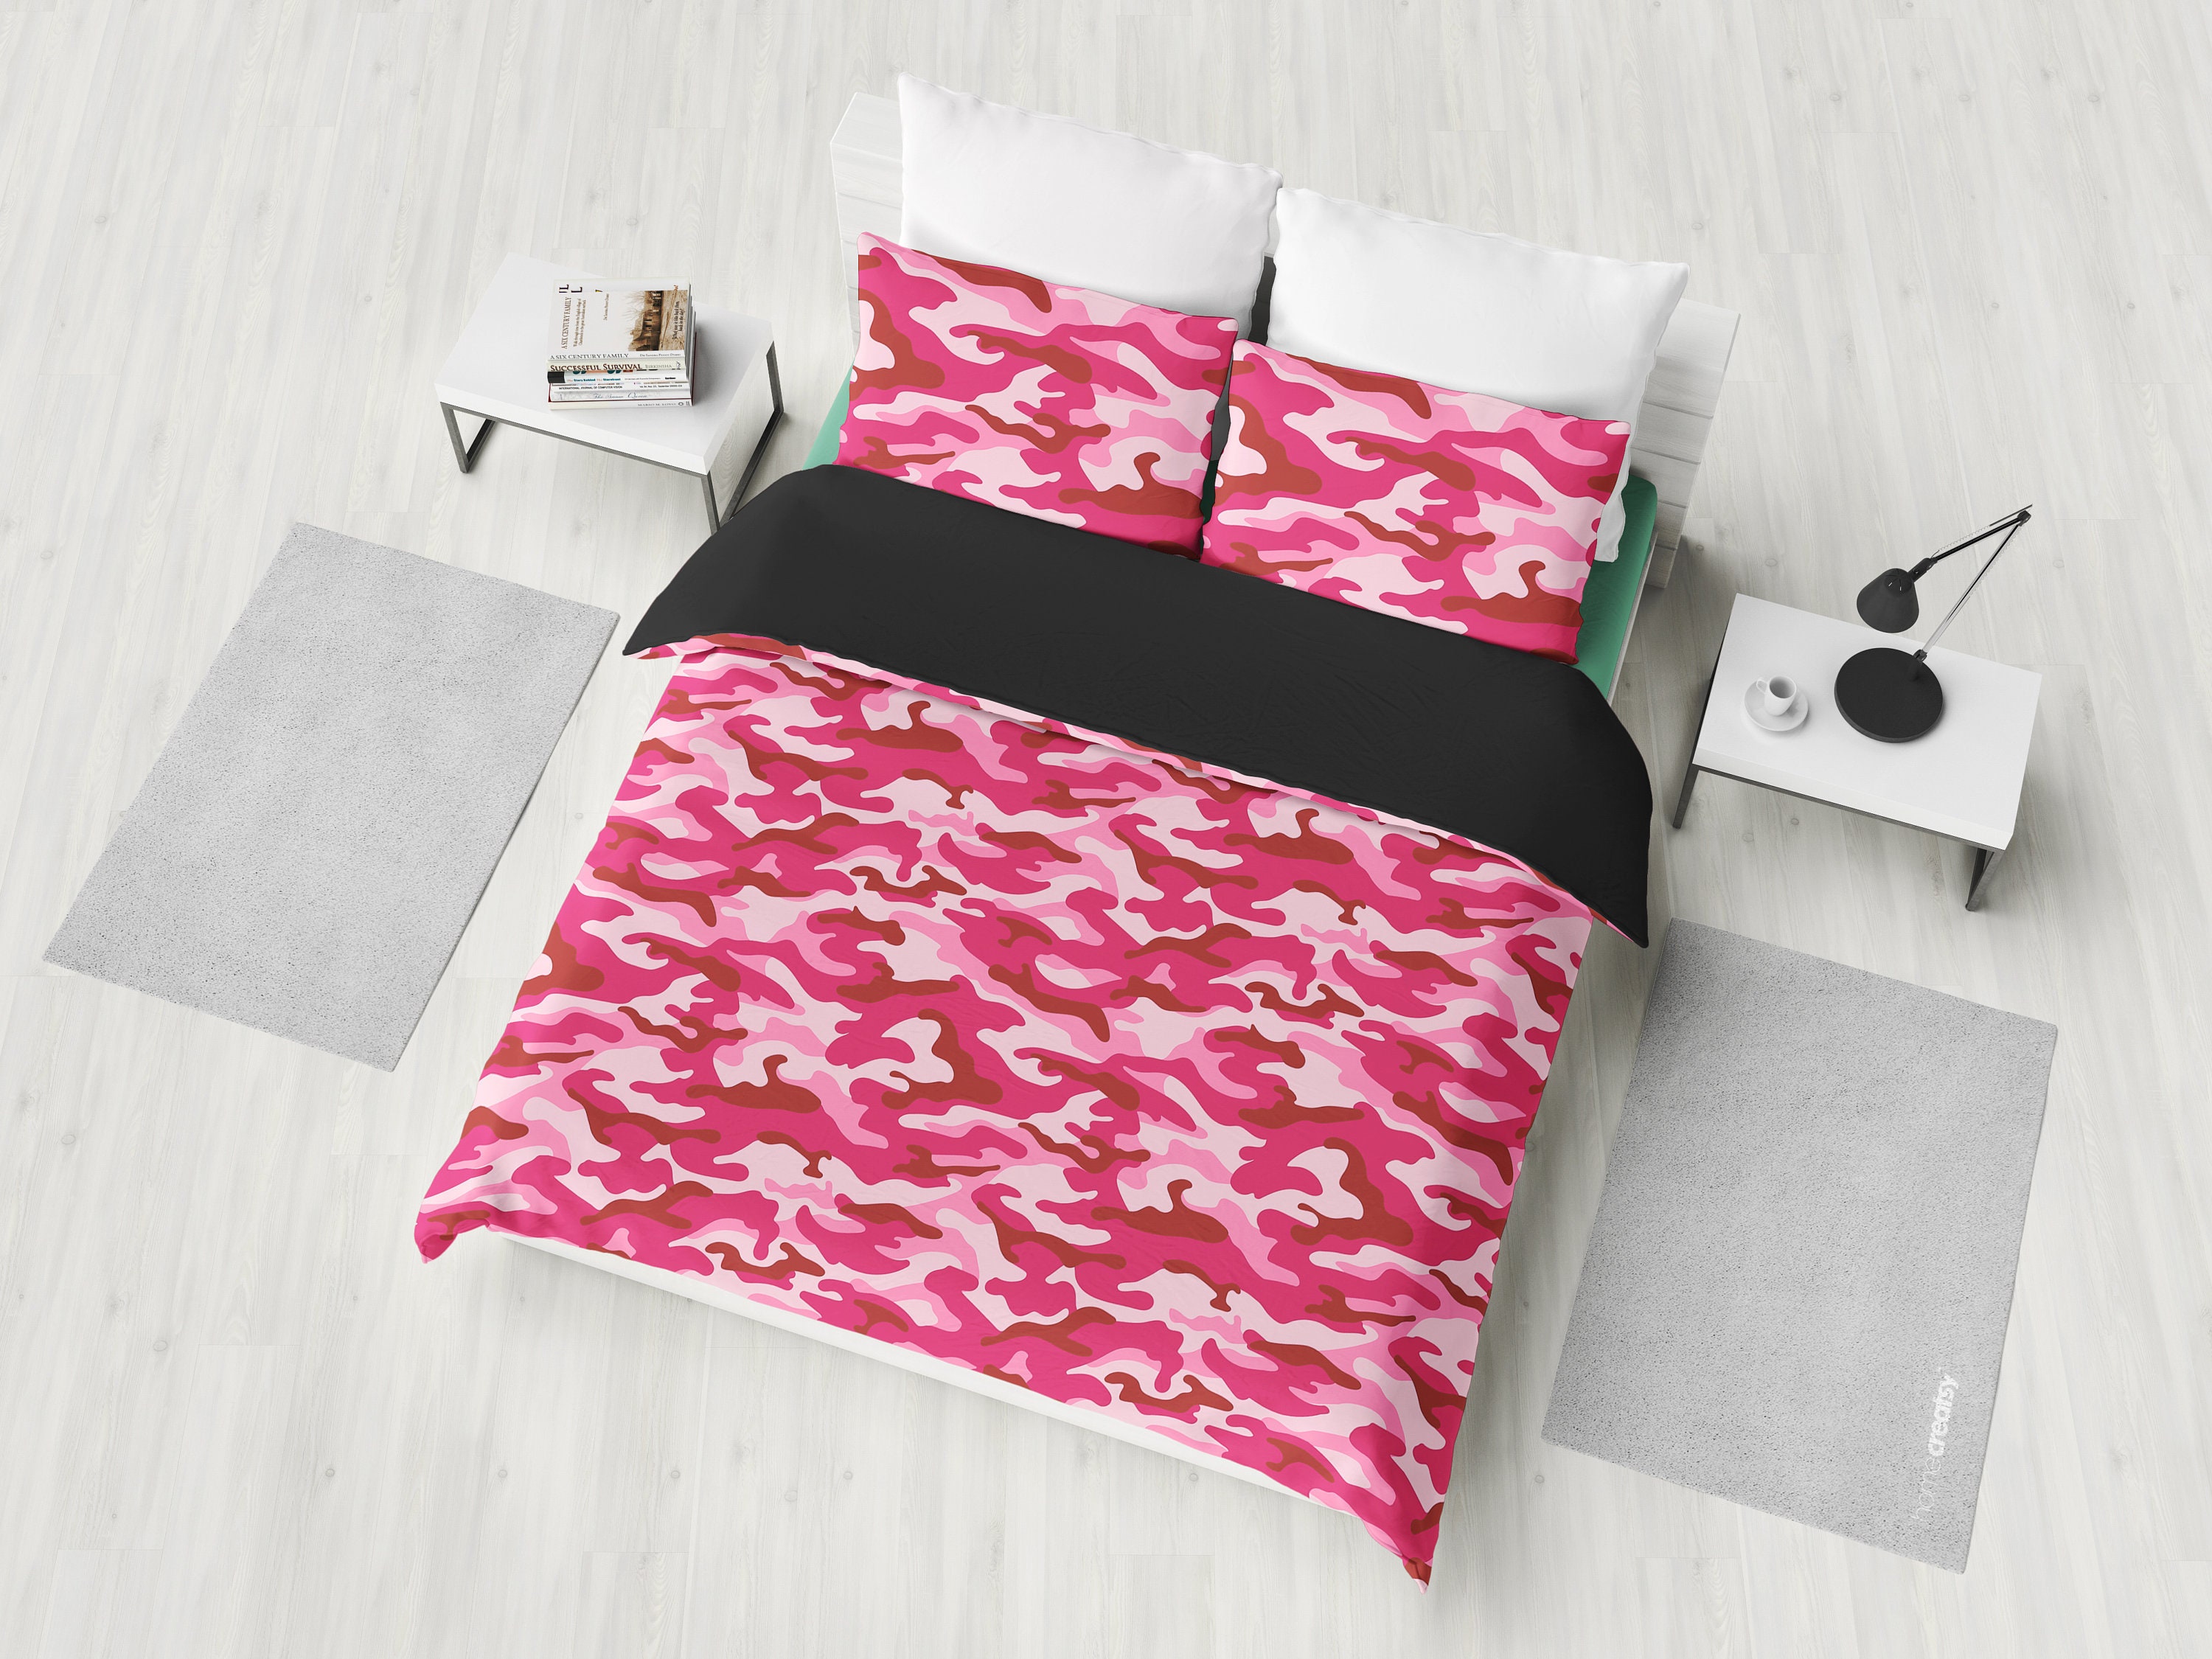 A Bathing Ape Bedding for Sale